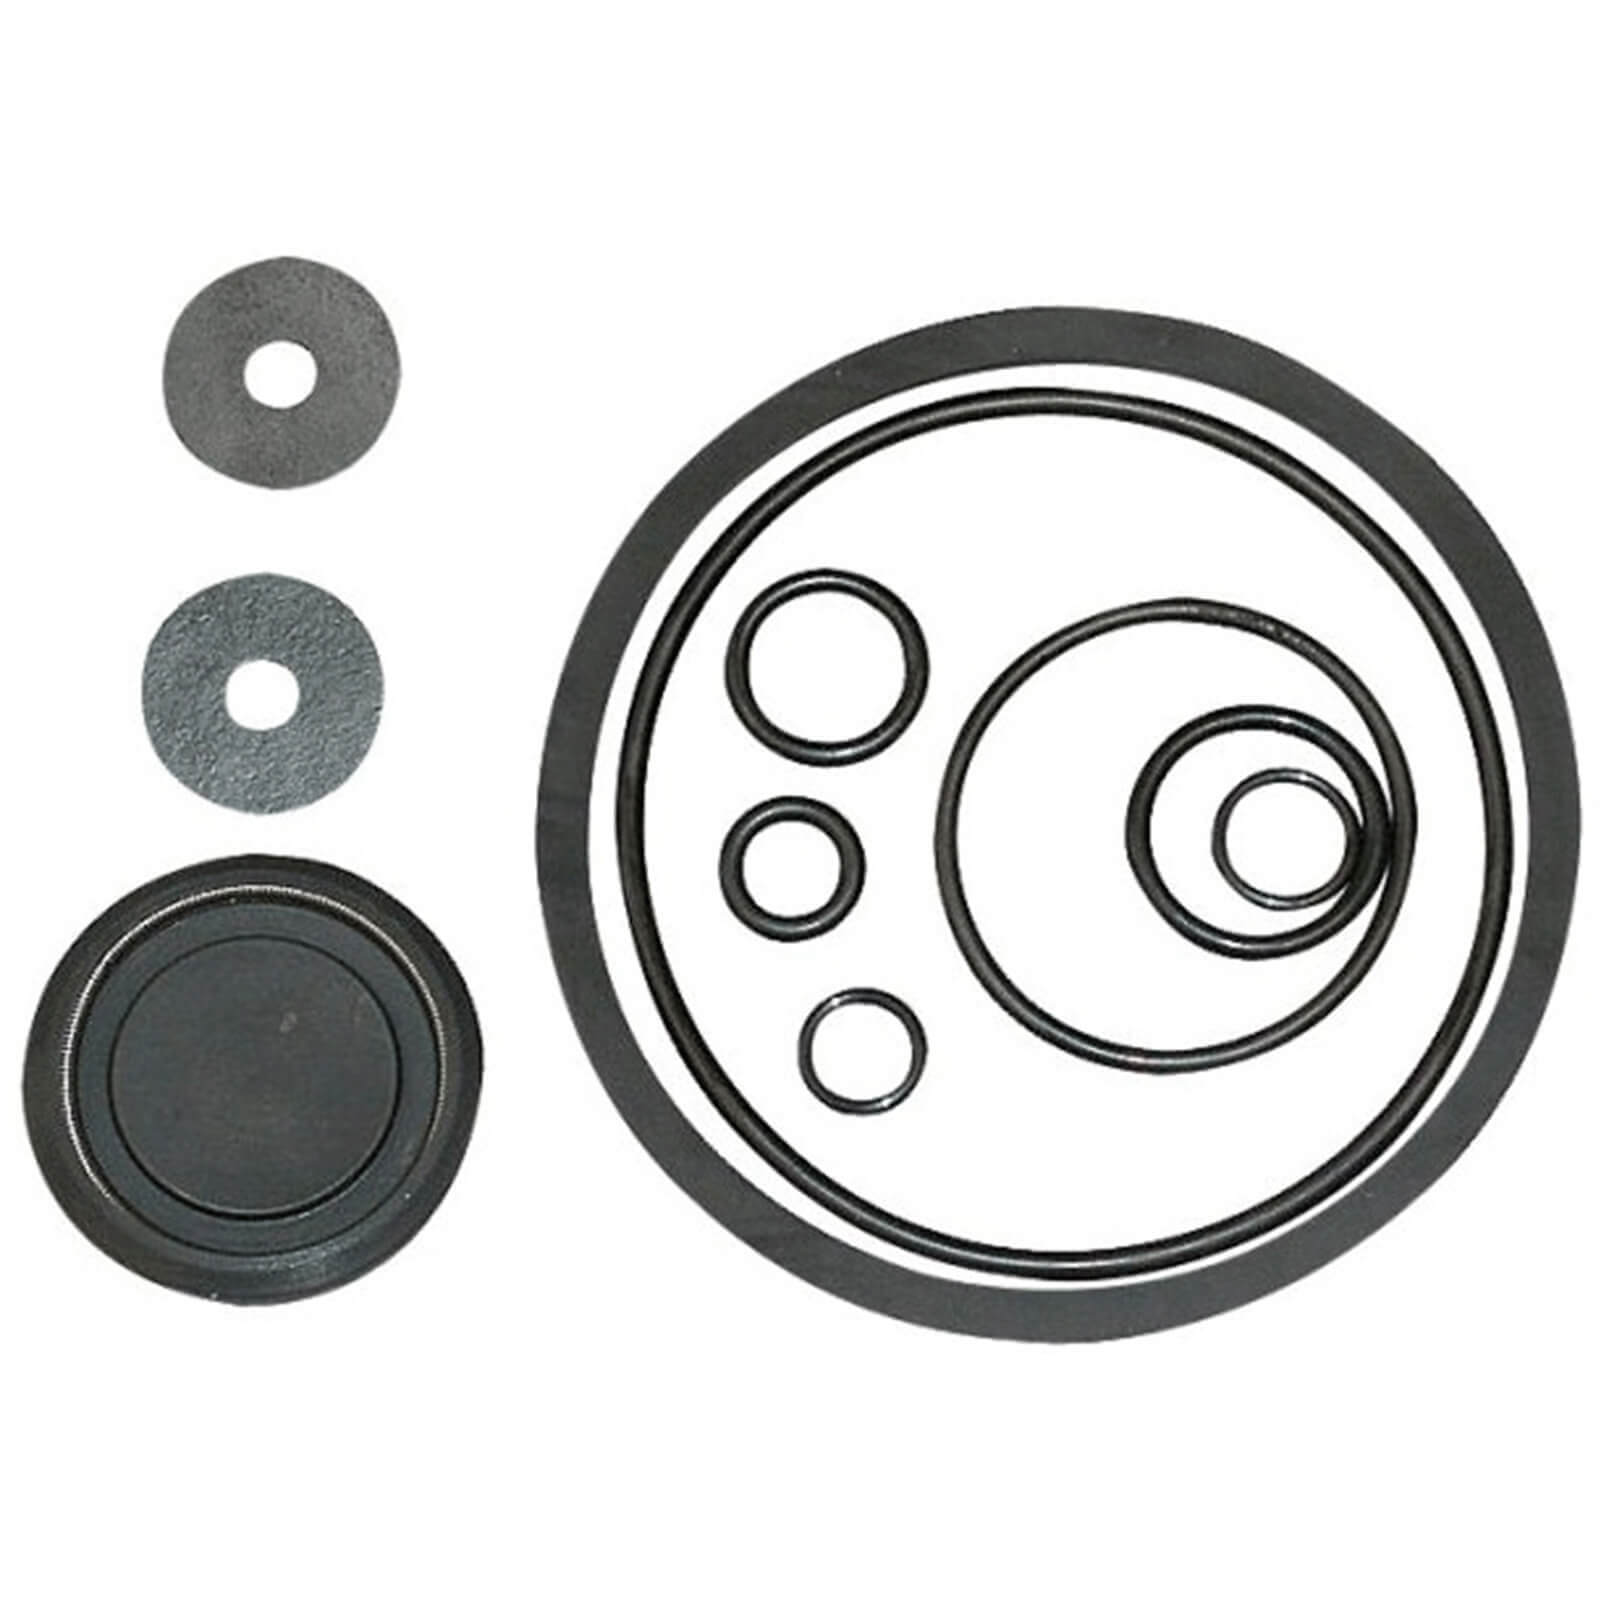 Photo of Solo Fkm Gasket Kit 425 And 435 Pressure Sprayers